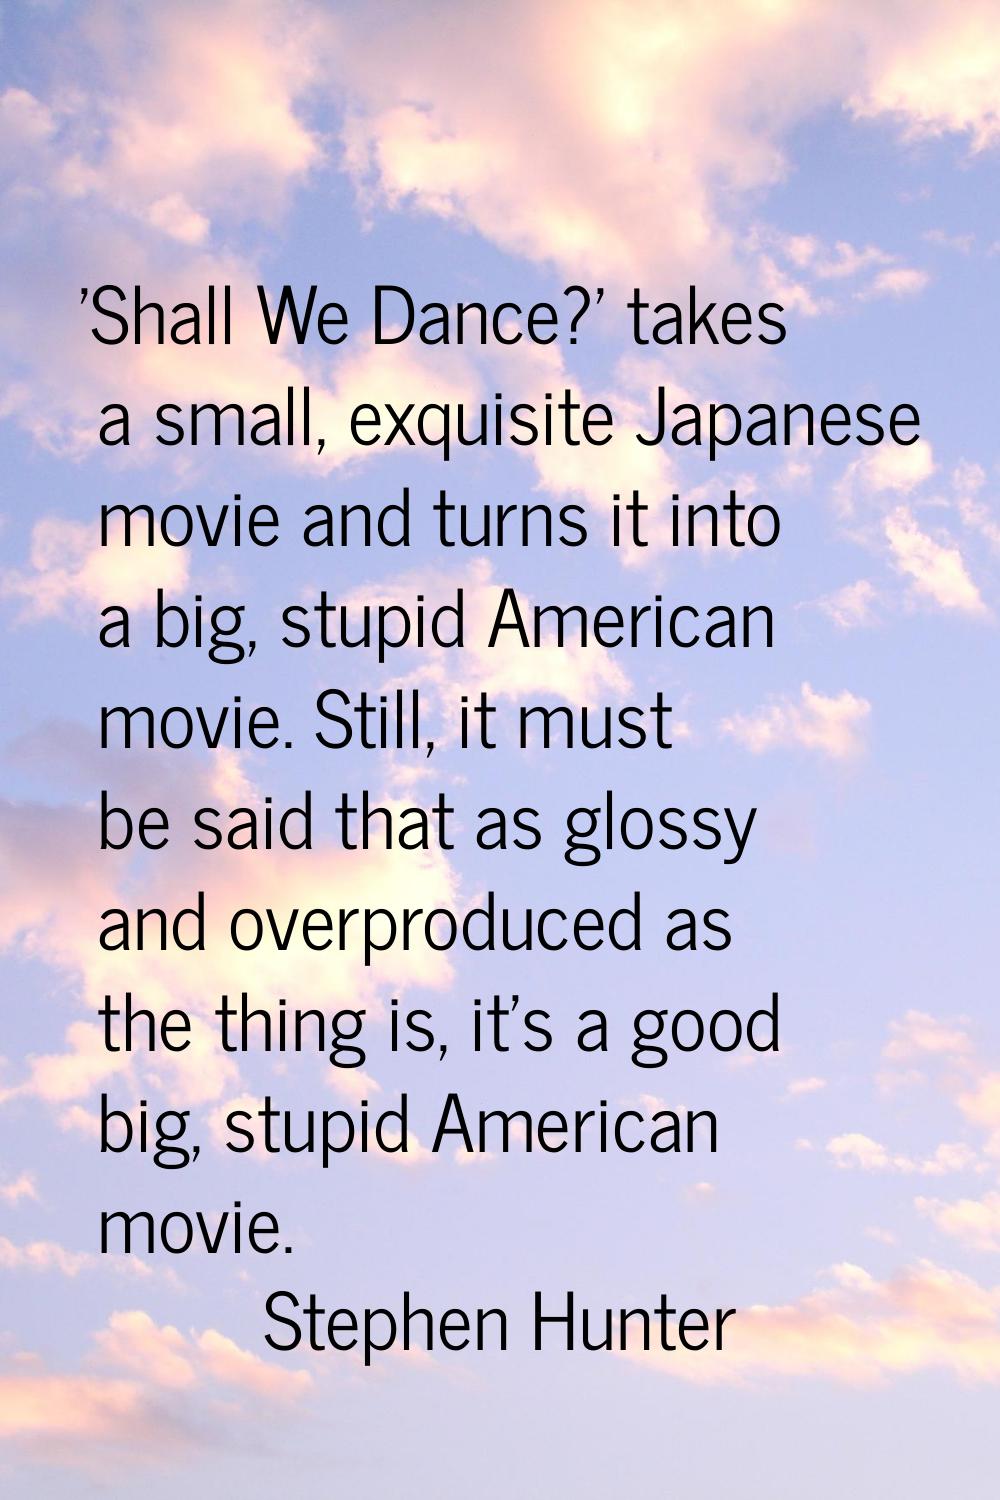 'Shall We Dance?' takes a small, exquisite Japanese movie and turns it into a big, stupid American 